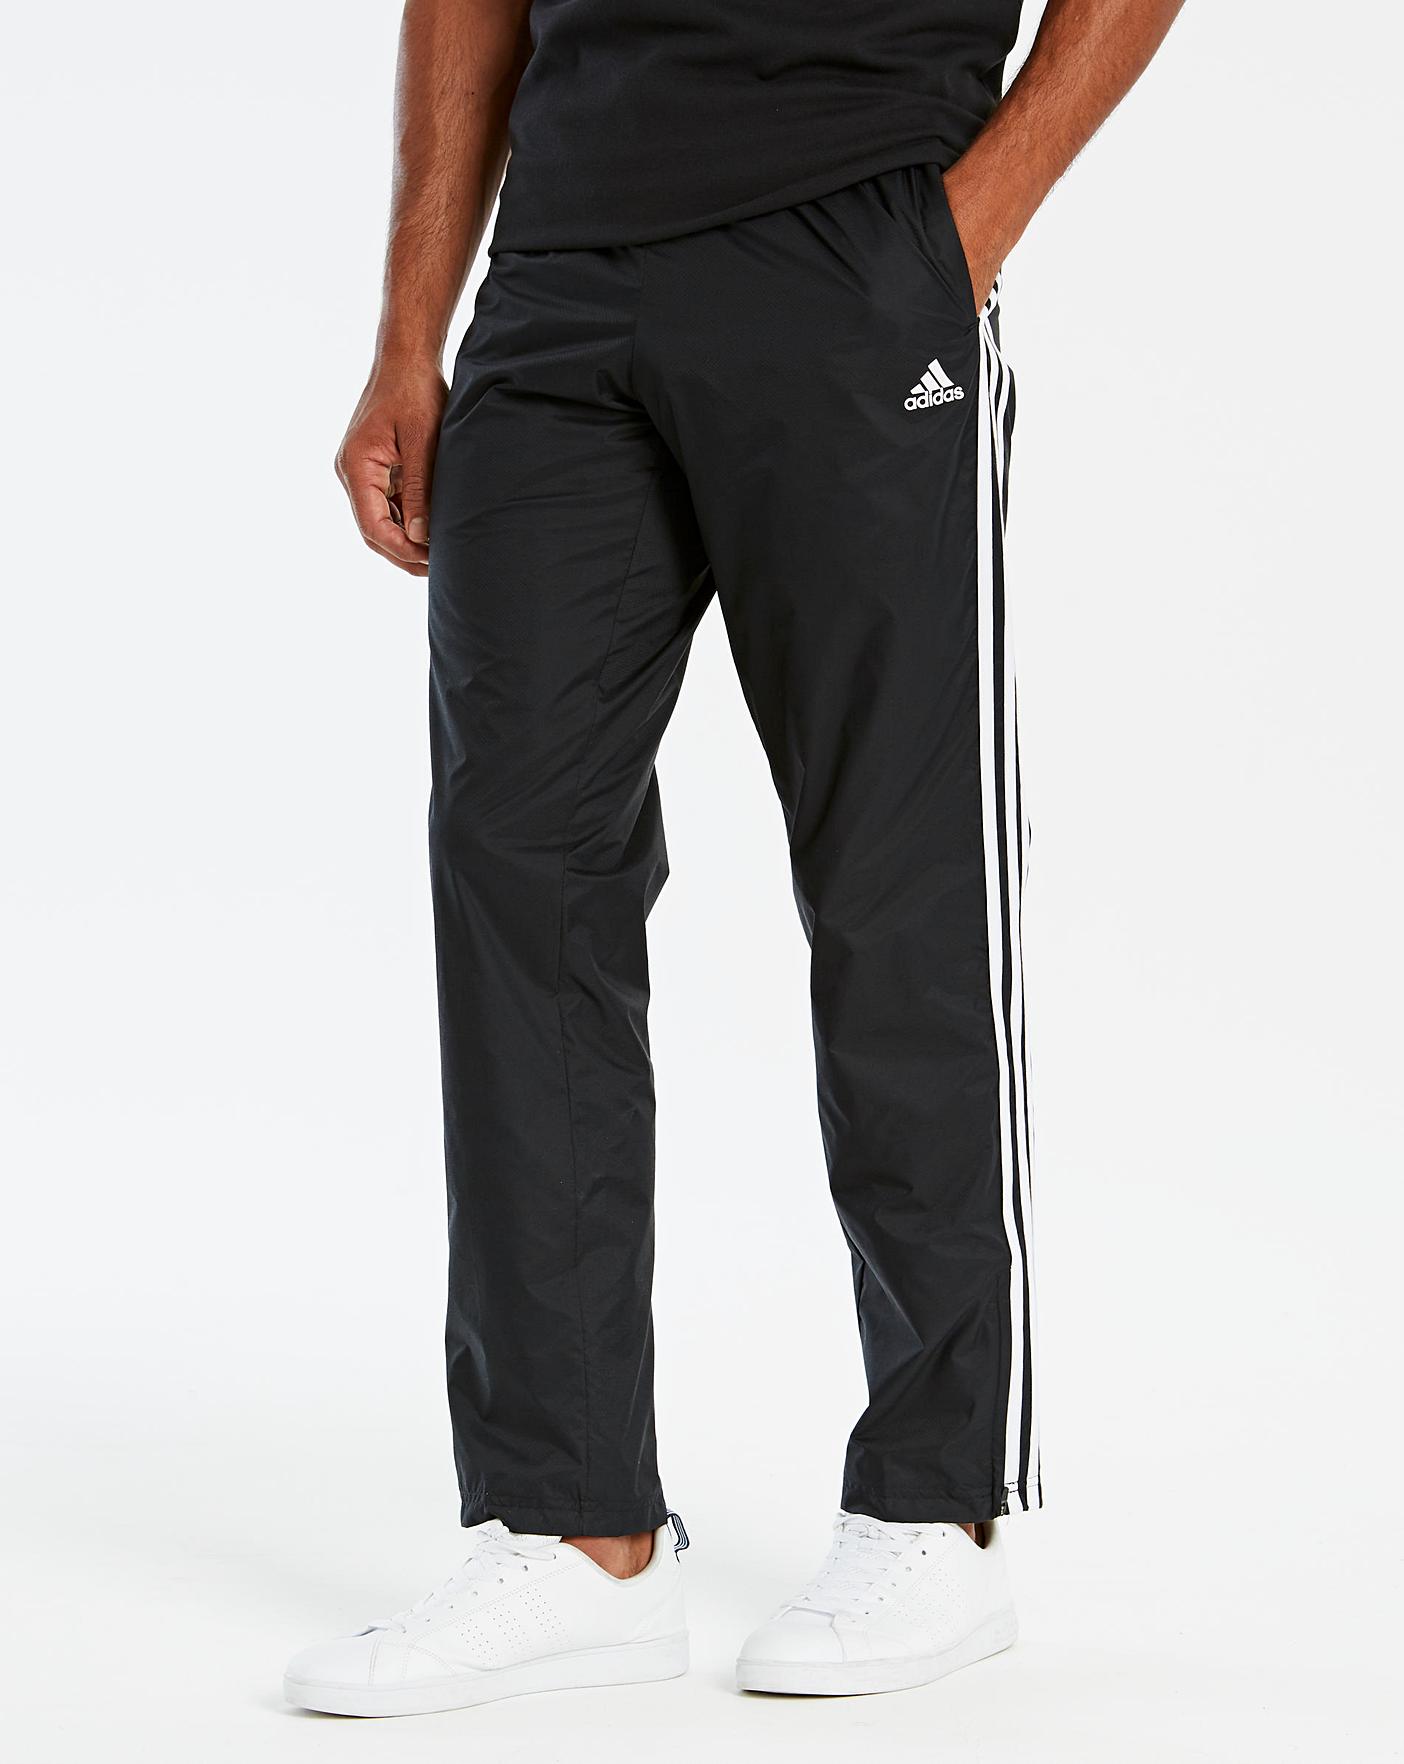 adidas essential woven pants